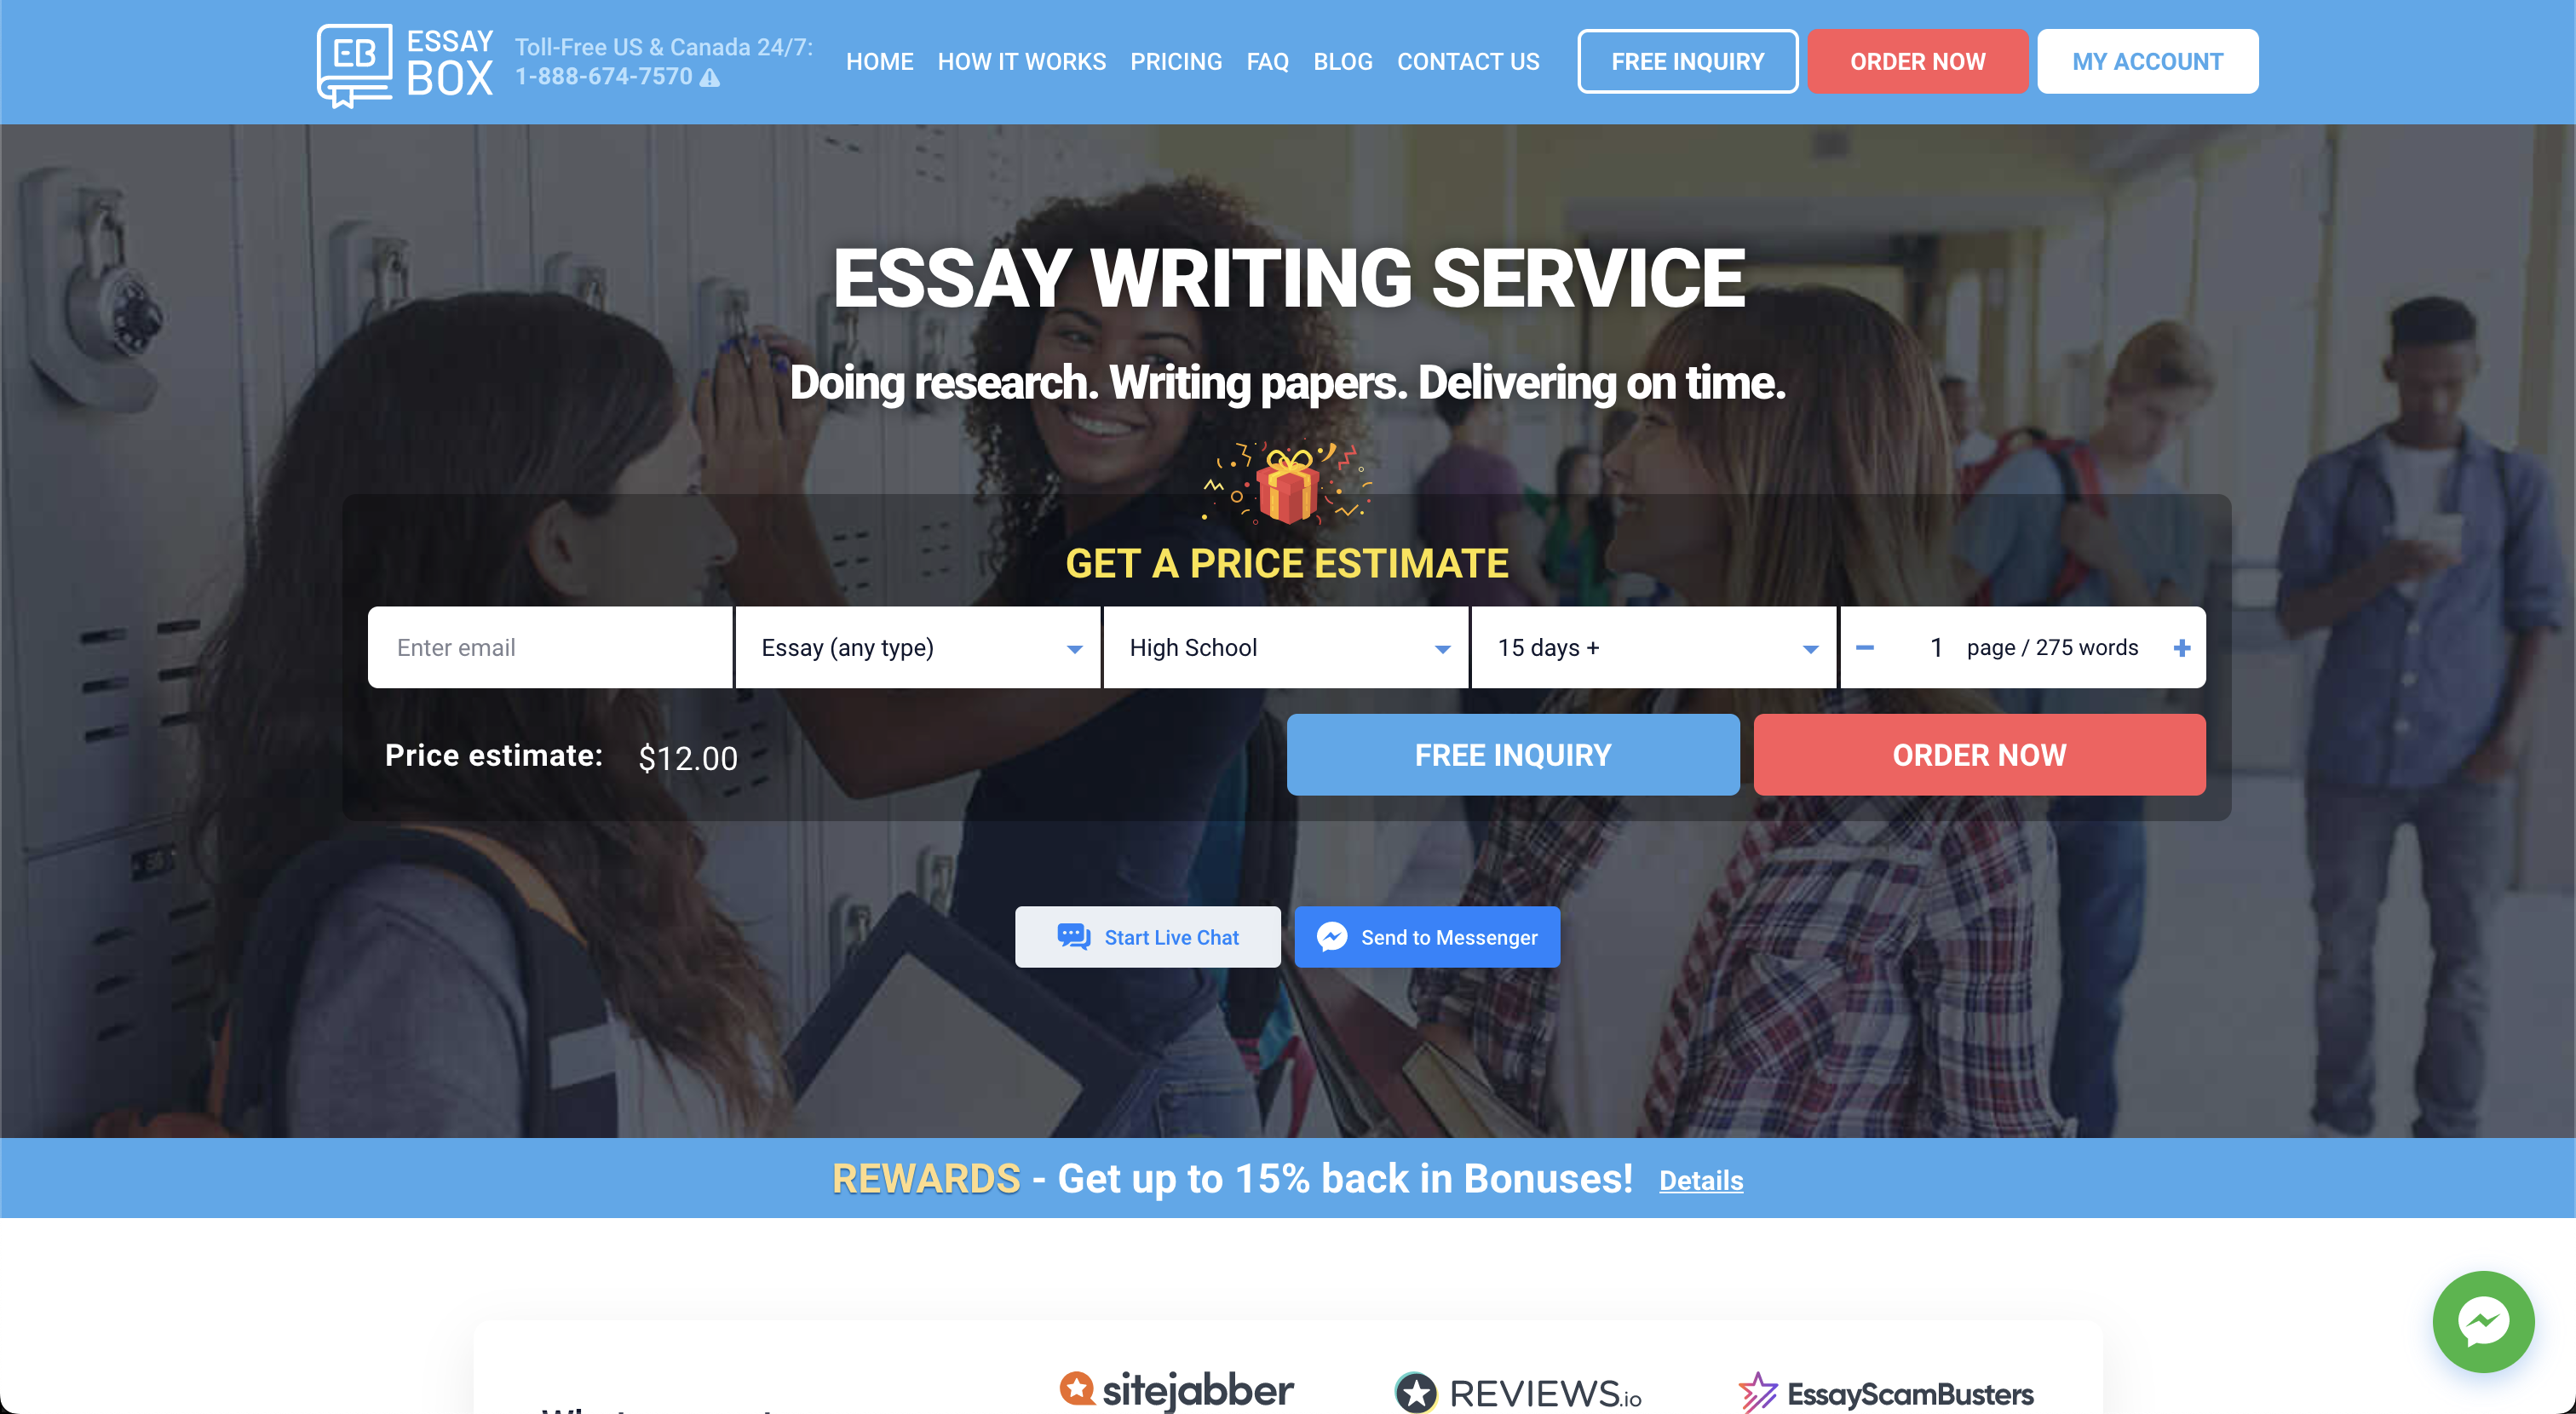 essaybox allows you to purchase college papers online